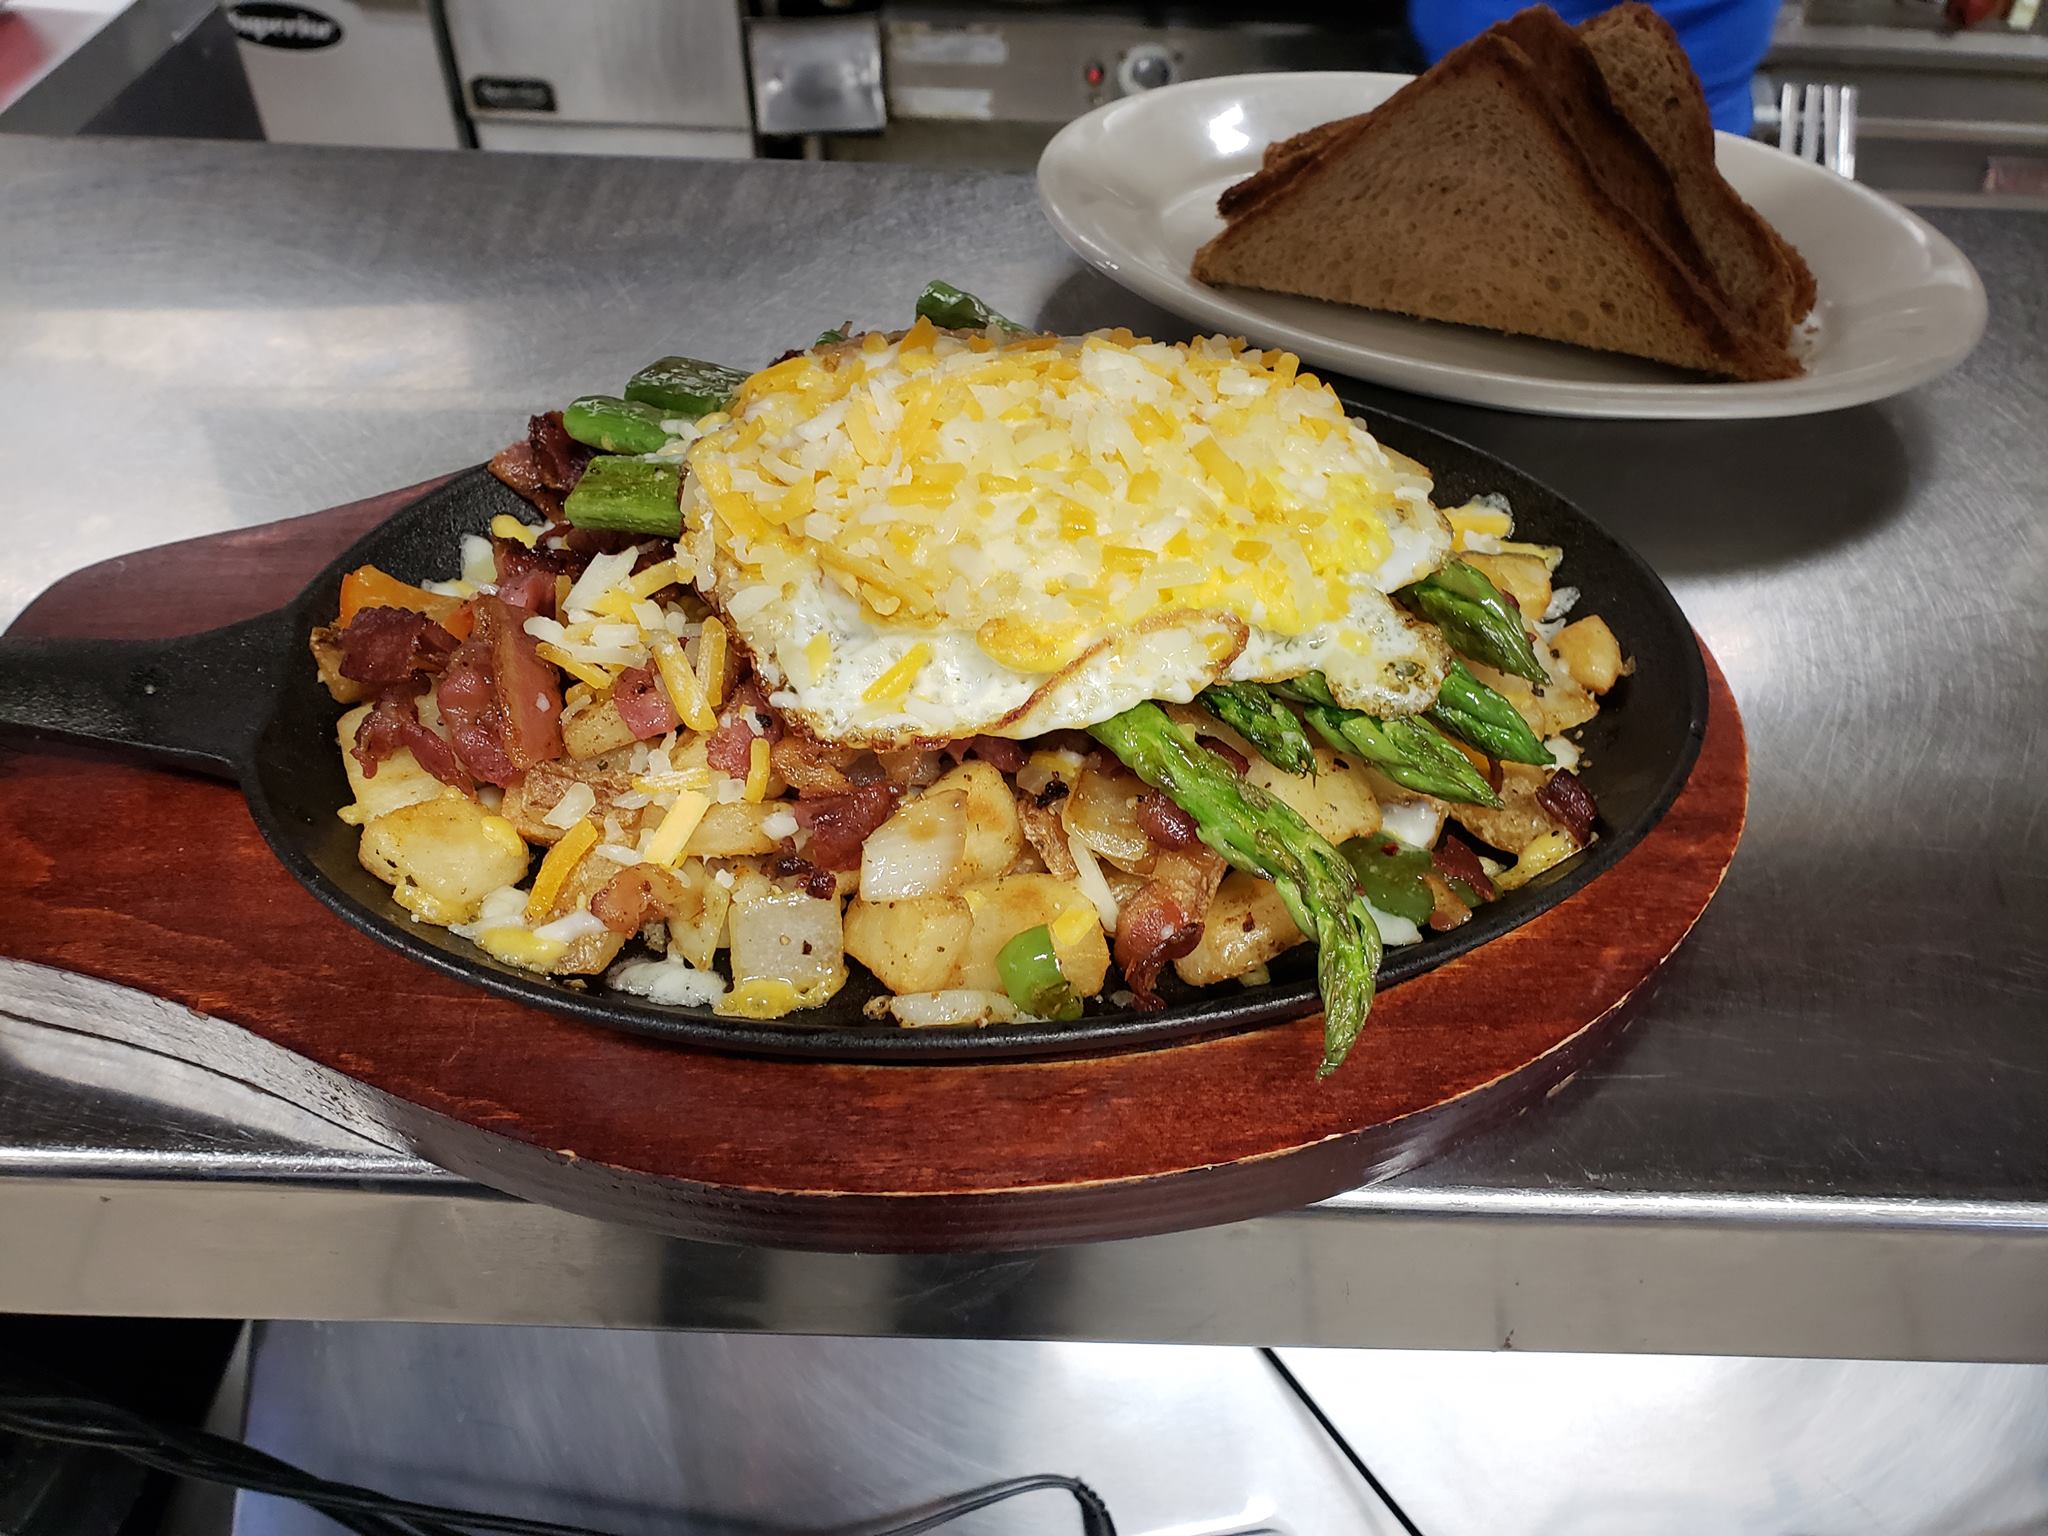 Home fries with asparagus, bacon, and a fried egg